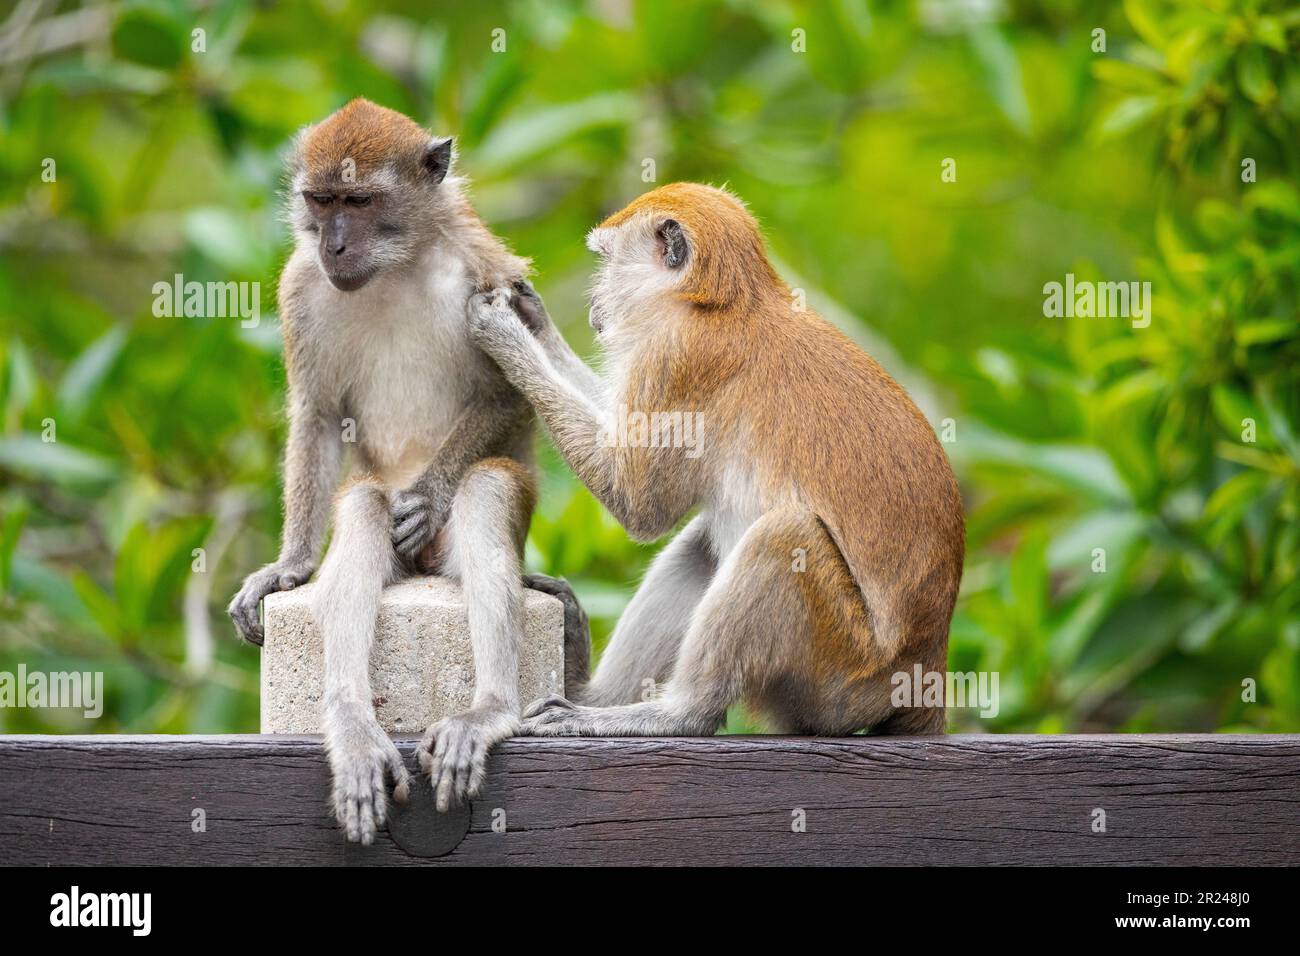 Two members of a long tailed macaque family rest and groom each other while sitting on the balustrade of a bridge over a mangrove river, Singapore Stock Photo